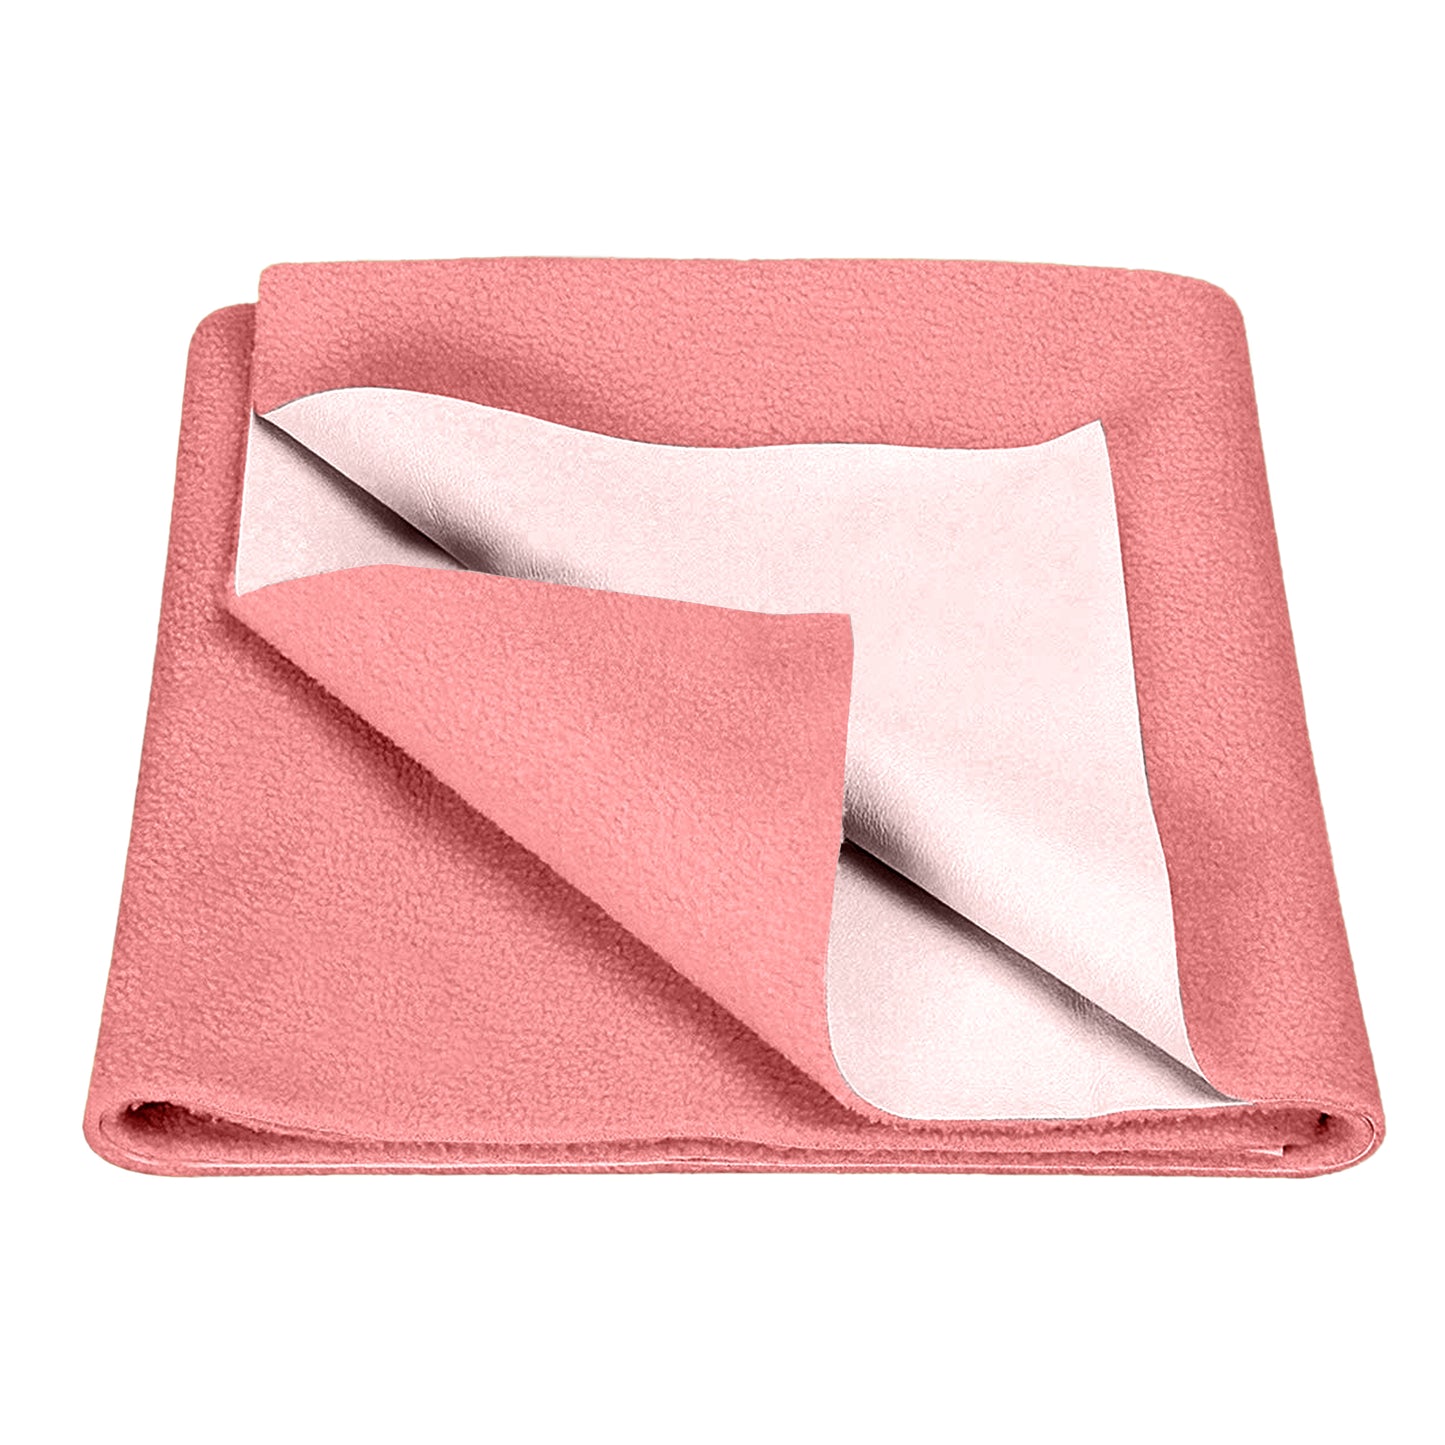 Waterproof Bed Protector, Quick Dry Sheet, Baby Bed Protector (70 X 100 CM), Pack of 1 -SELMON ROSE